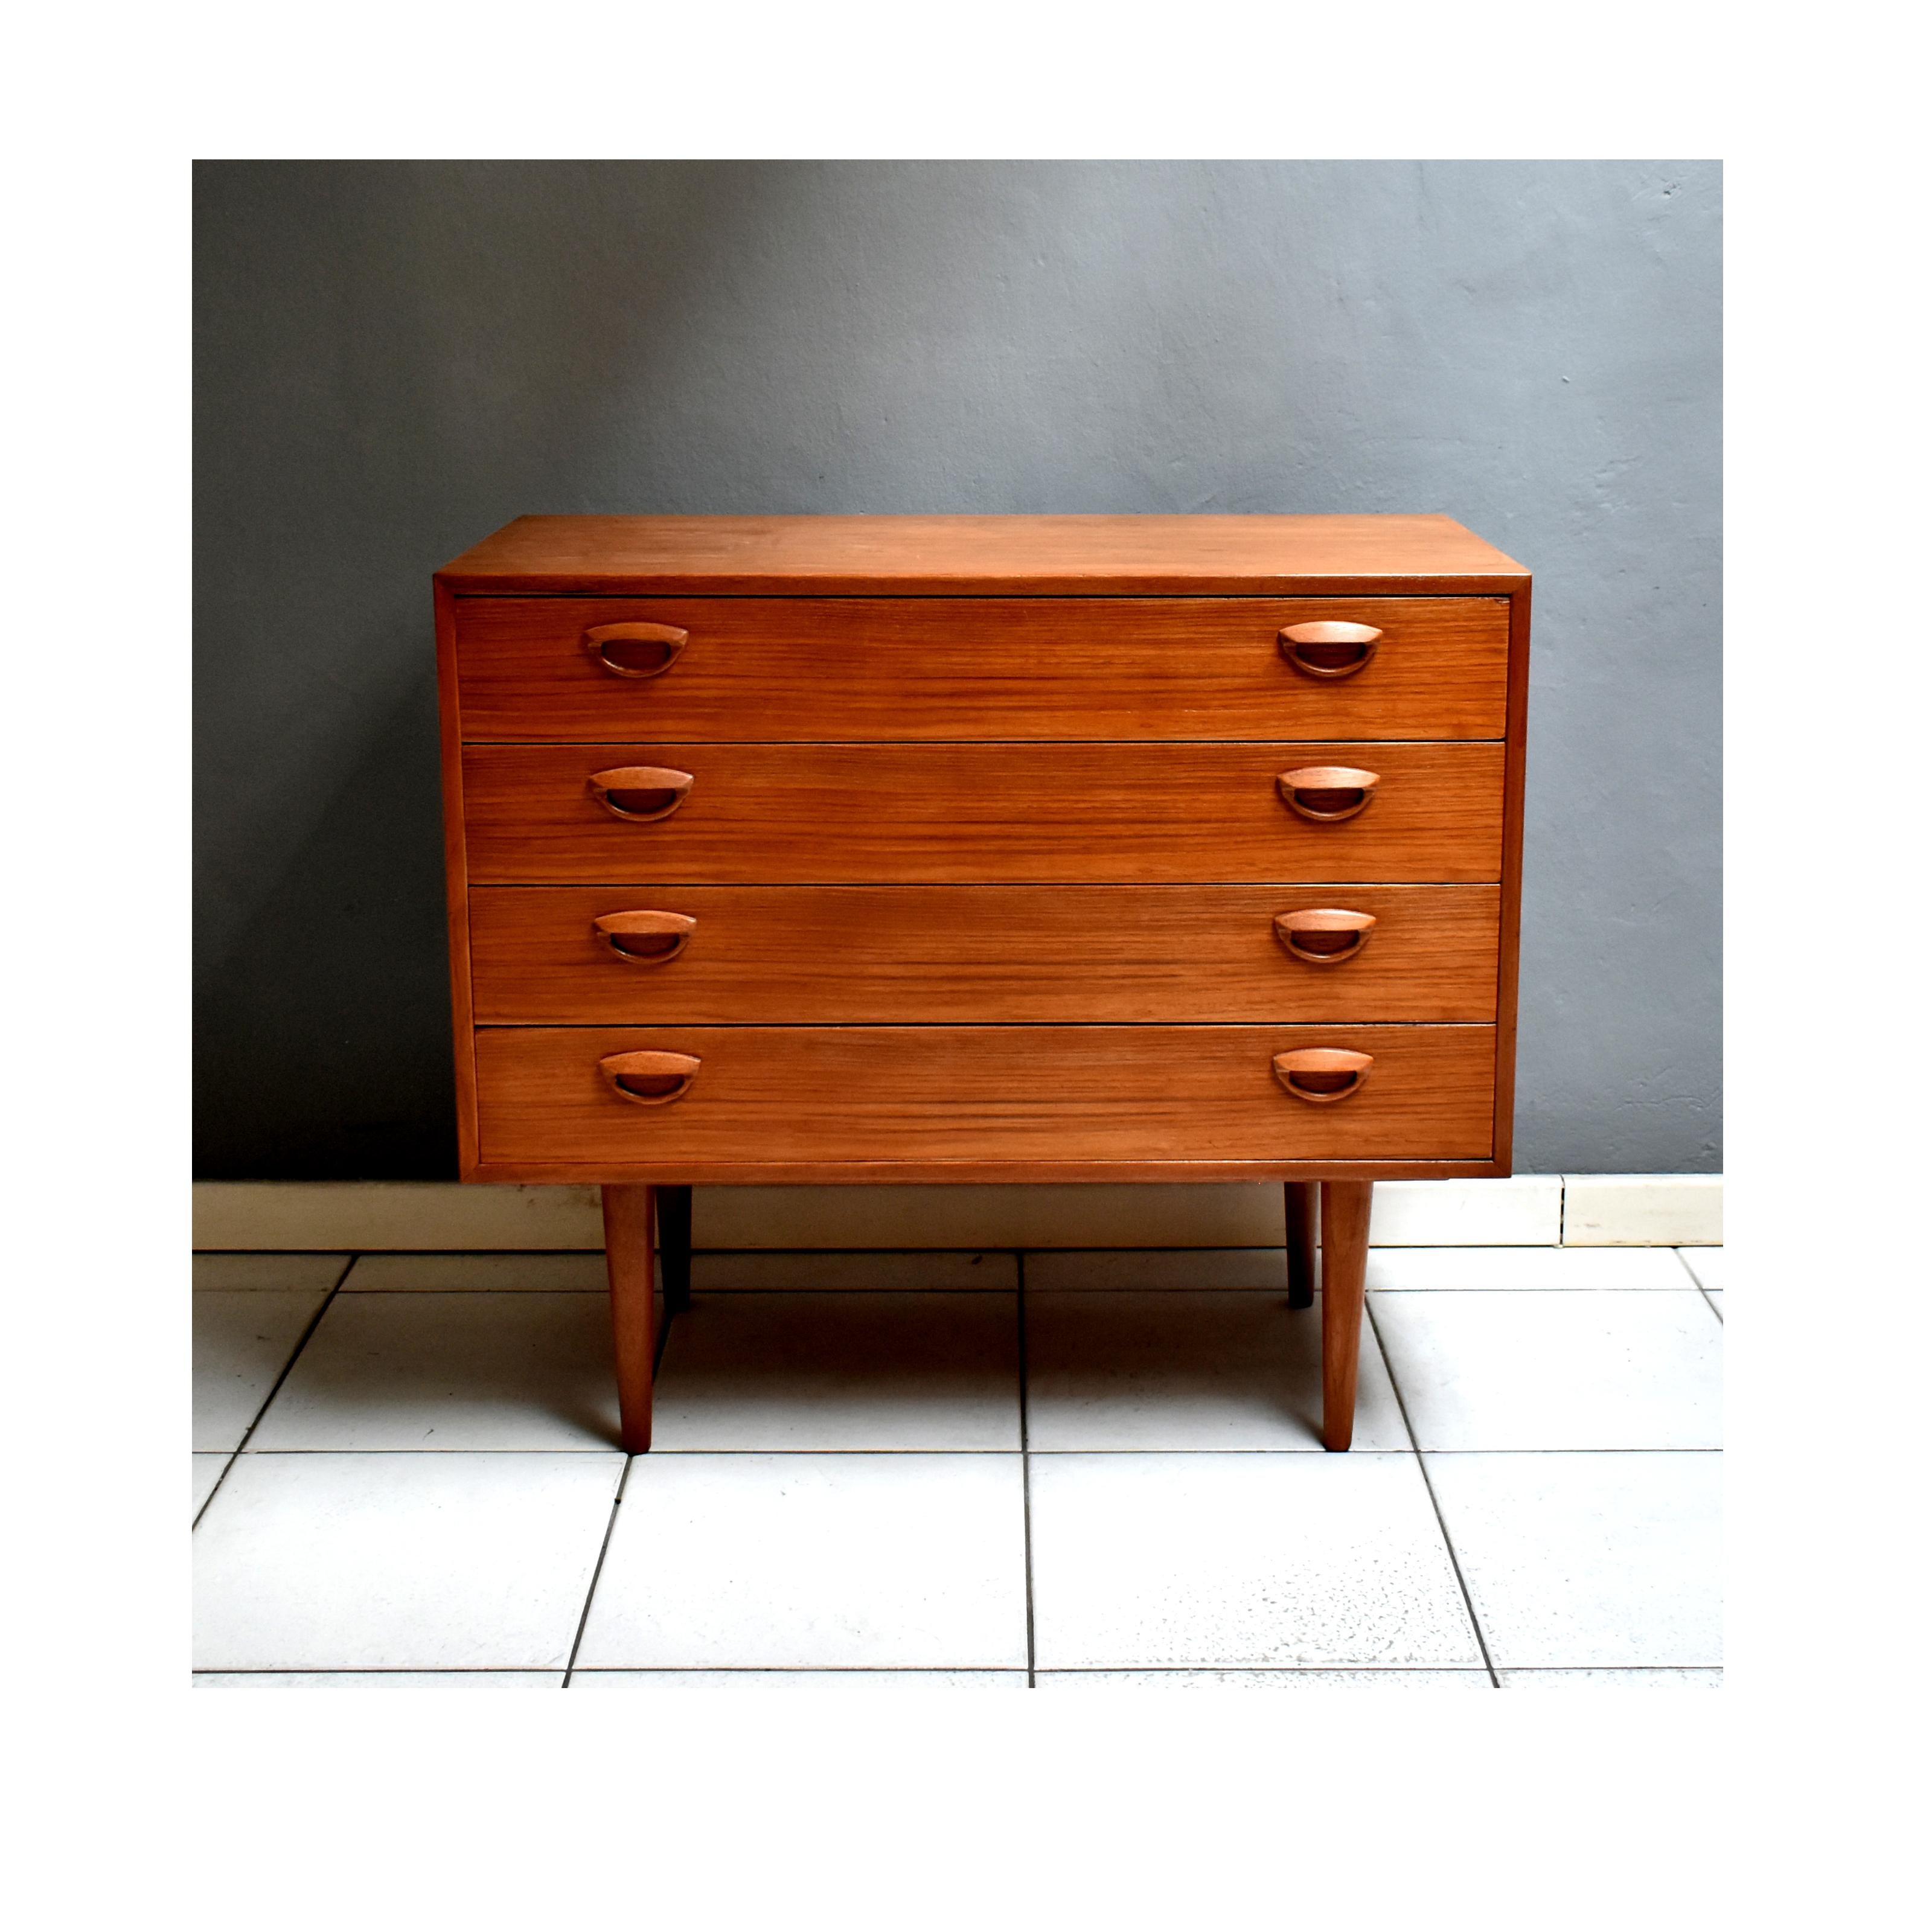 Vintage 1960s Danish chest of drawers.
The chest of drawers / dresser has a rectangular wooden structure, with four container drawers.
Useful height of container:
9.5 cm
Good condition, however the wood may show traces related to time.